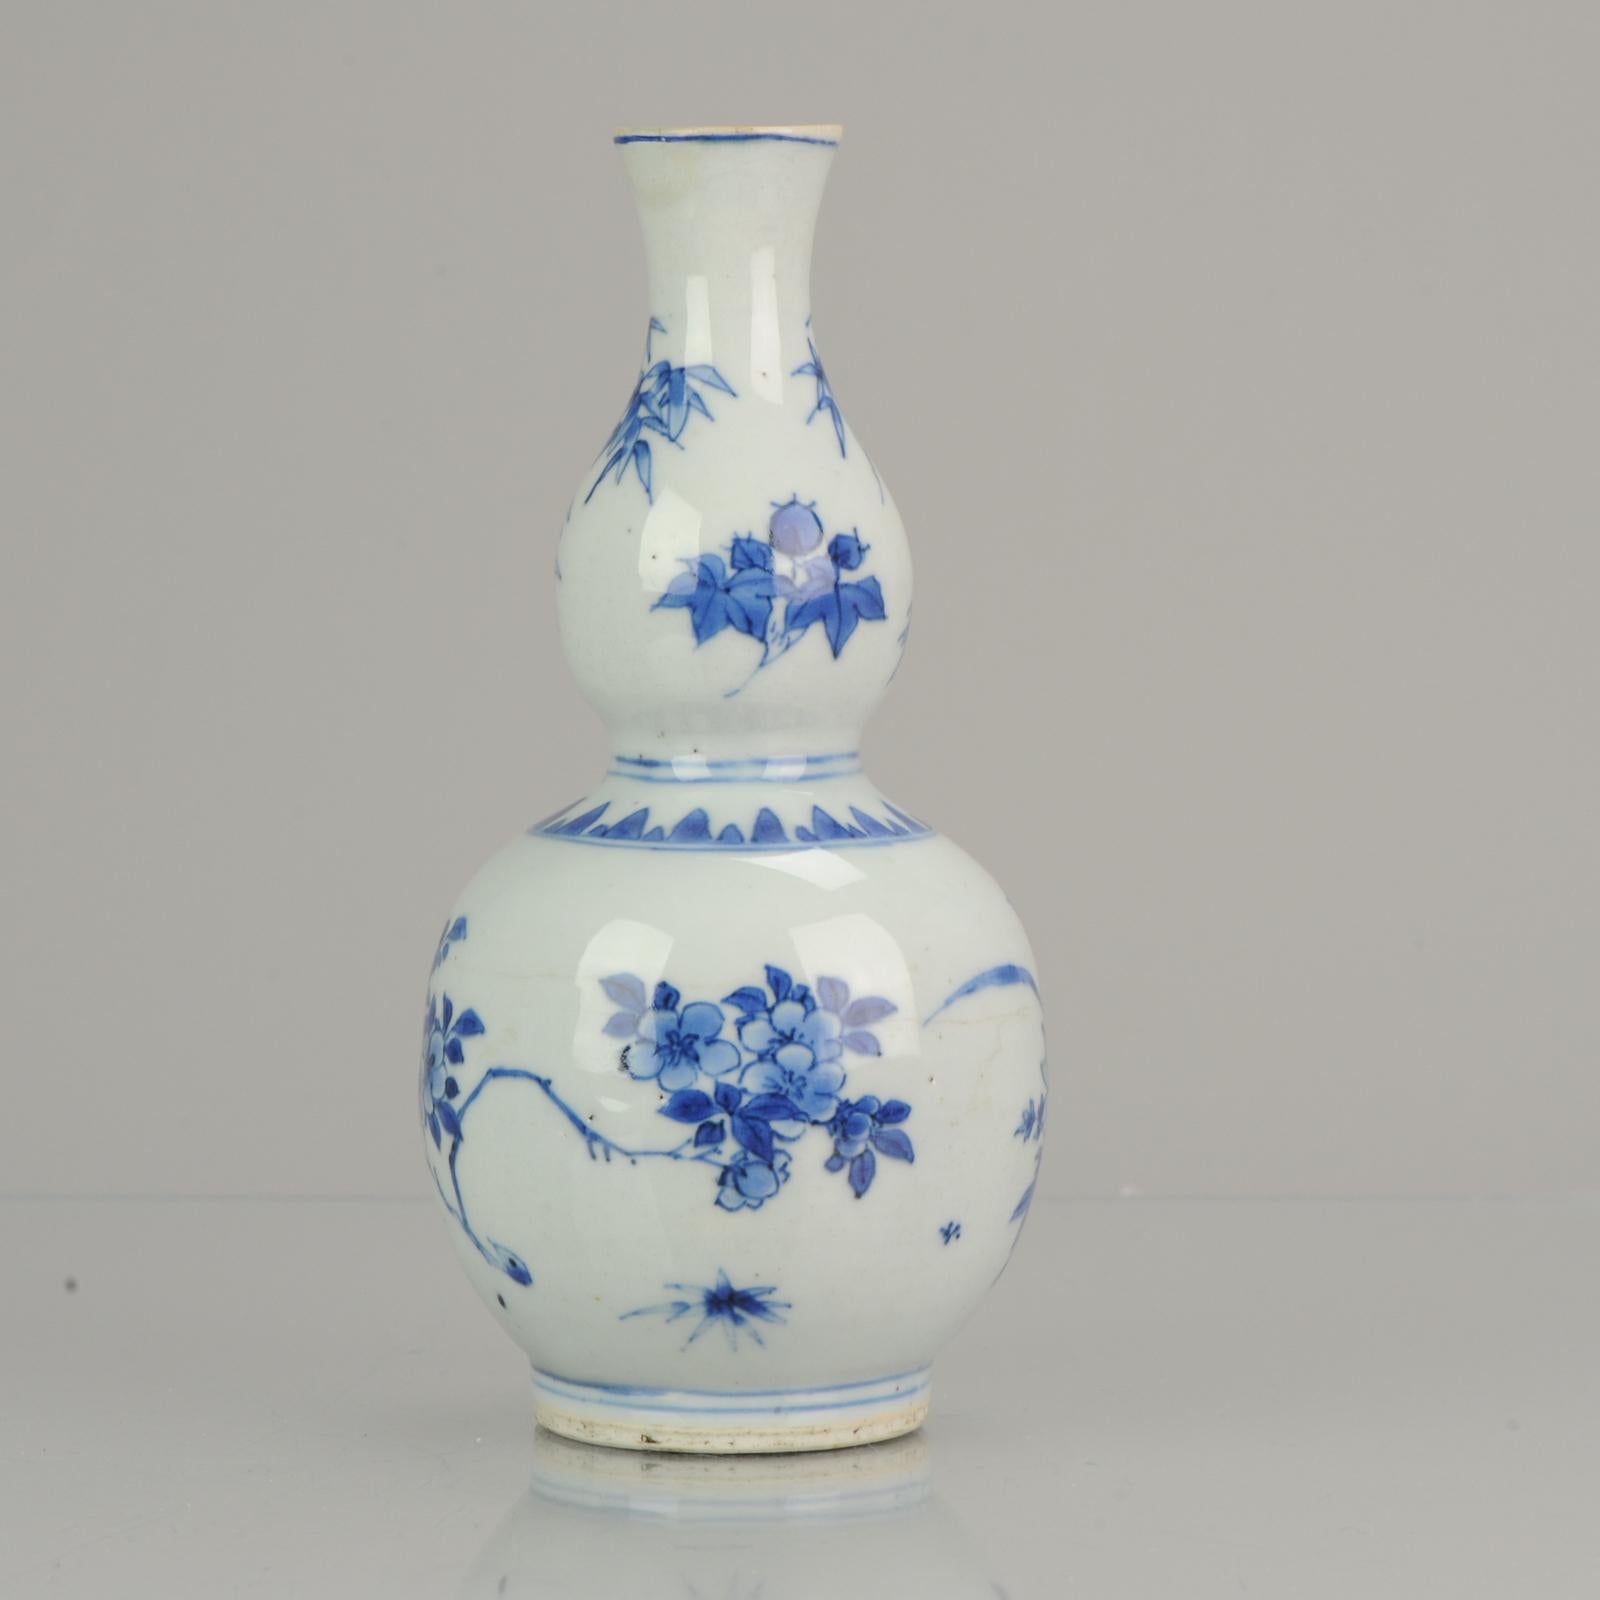 Top Quality Chinese Porcelain 17th C Transitional Double Gourd Vase, China 4